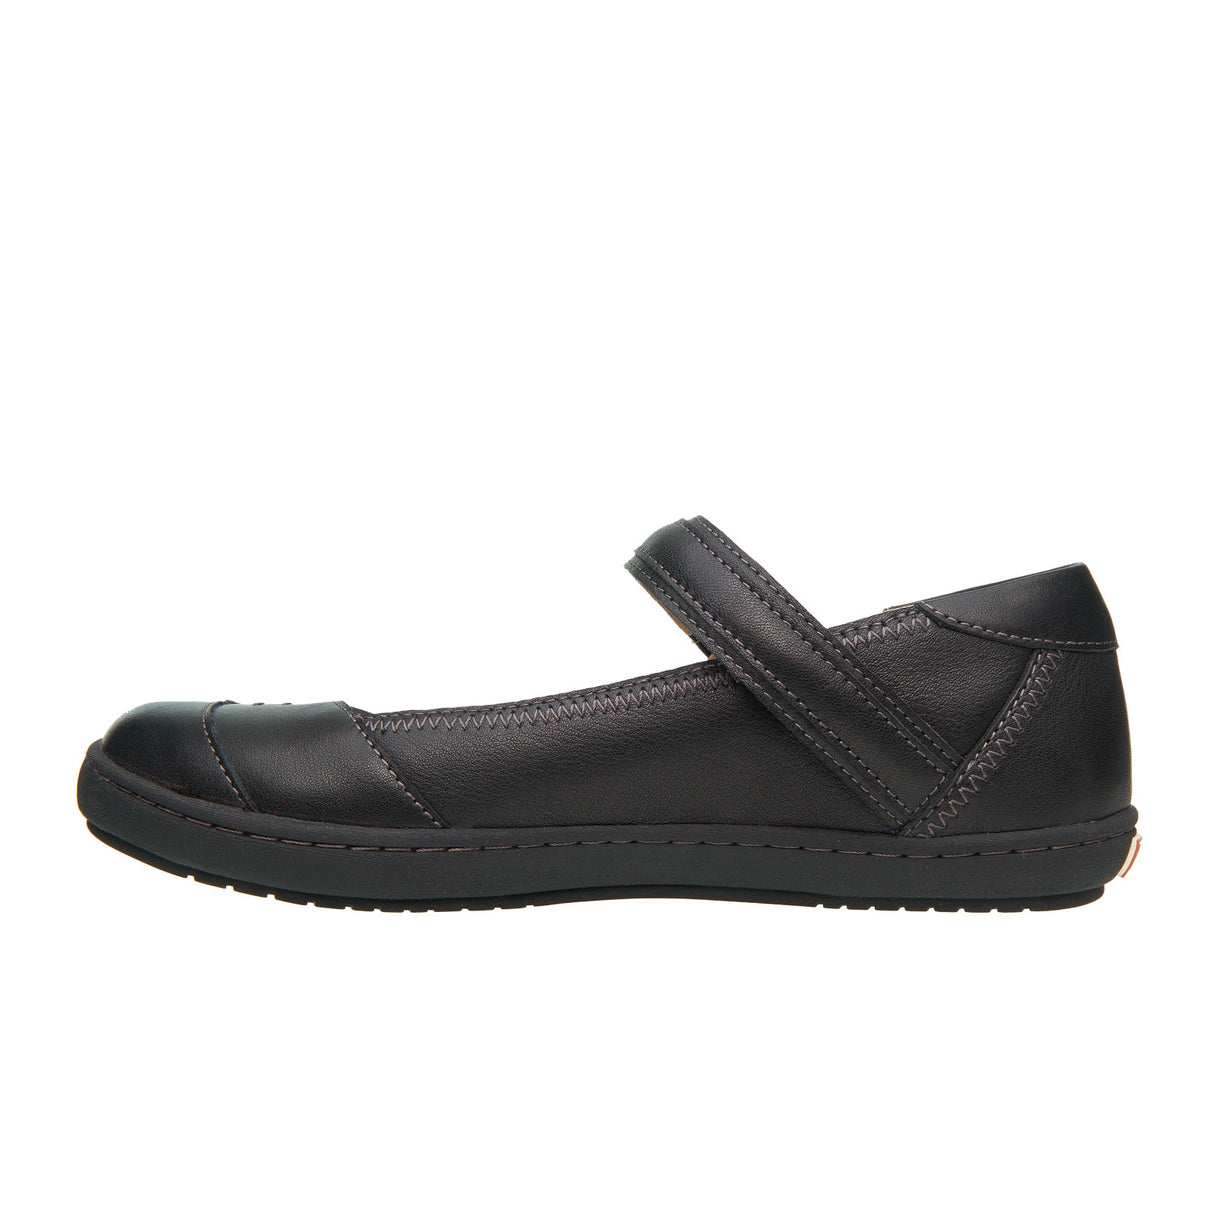 Taos Forward Mary Jane (Women) - Black on Black Dress-Casual - Mary Janes - The Heel Shoe Fitters